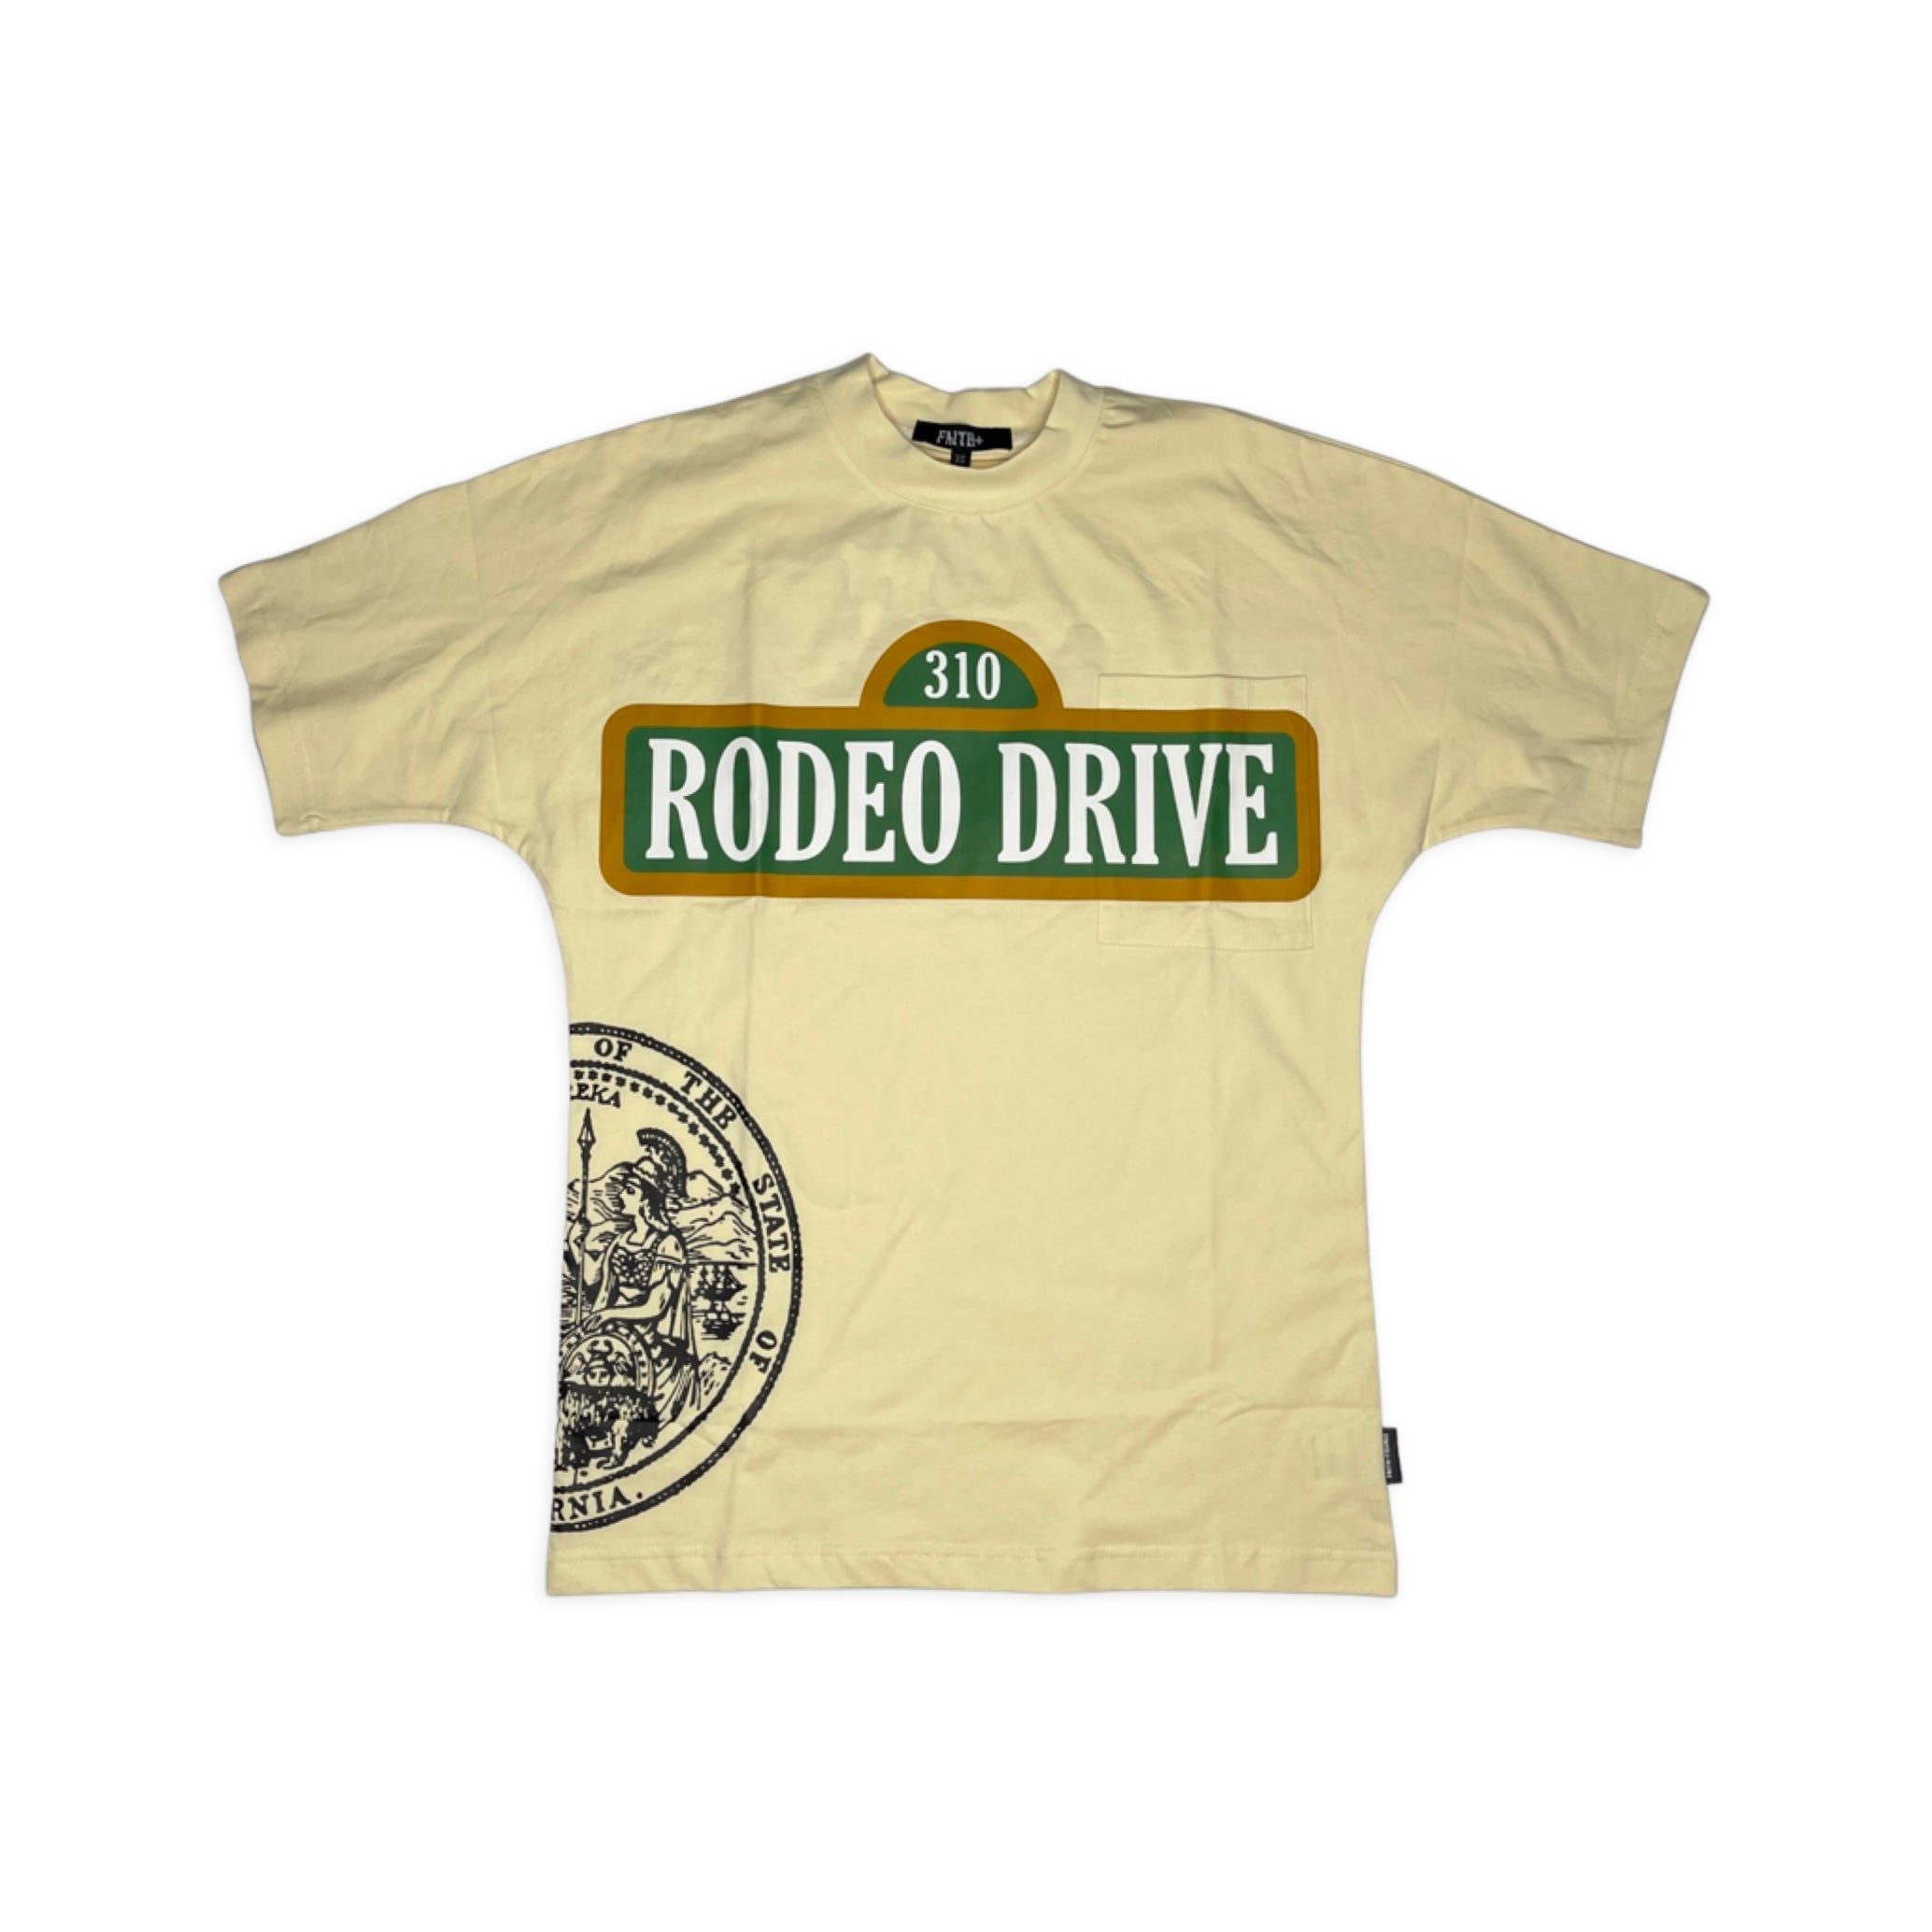 Rodeo drive graphic tee